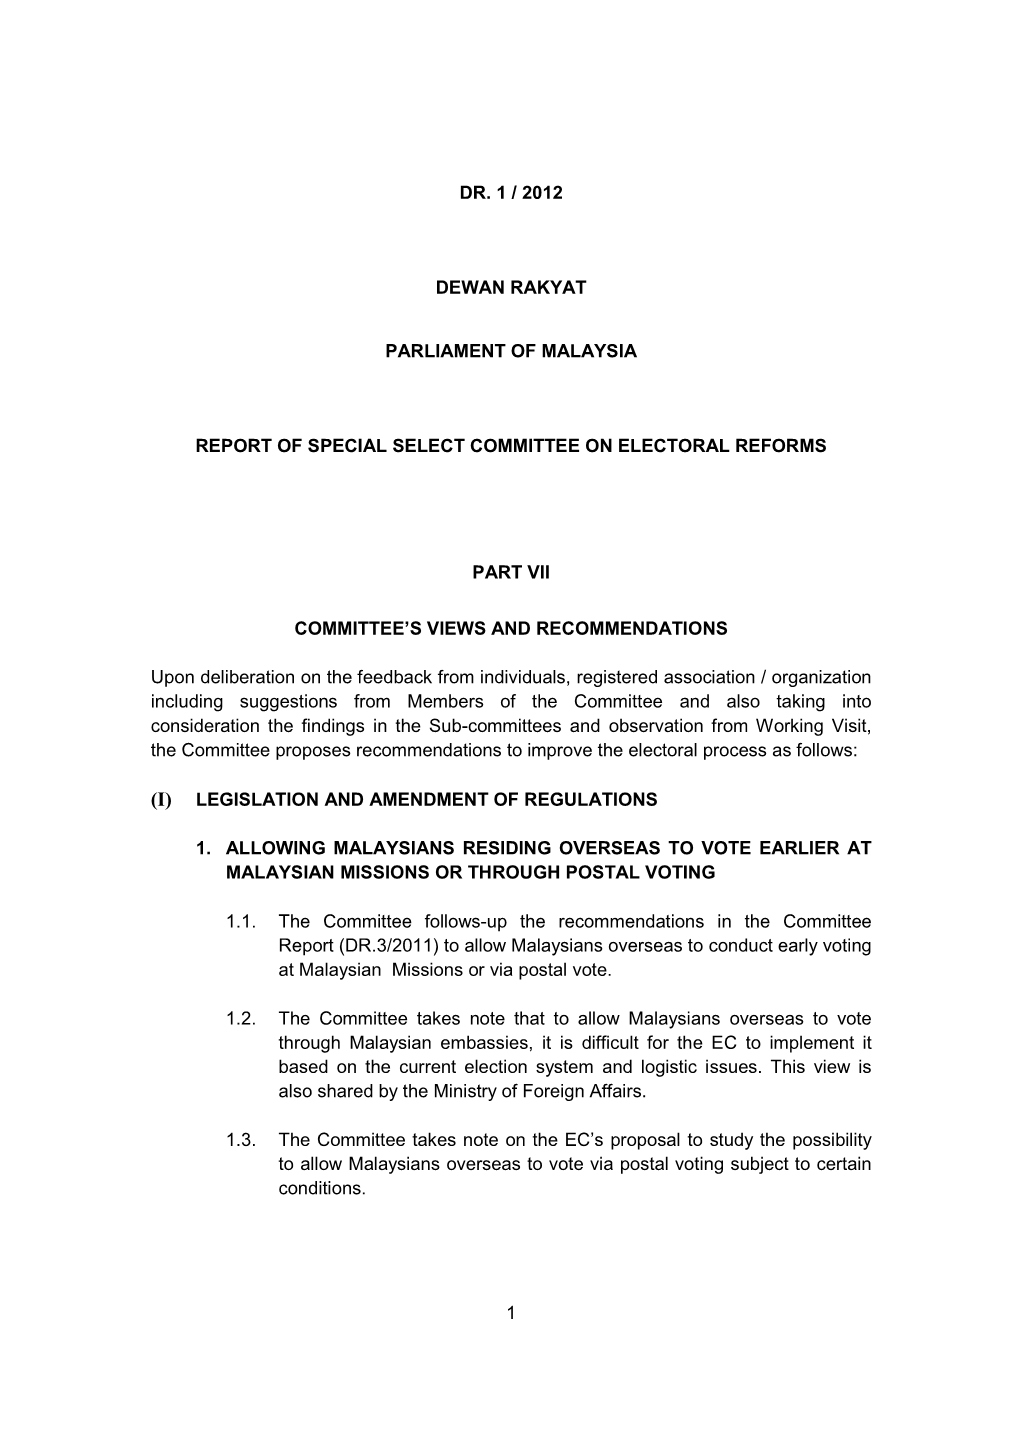 1 Dr. 1 / 2012 Dewan Rakyat Parliament of Malaysia Report of Special Select Committee on Electoral Reforms Part Vii Committee